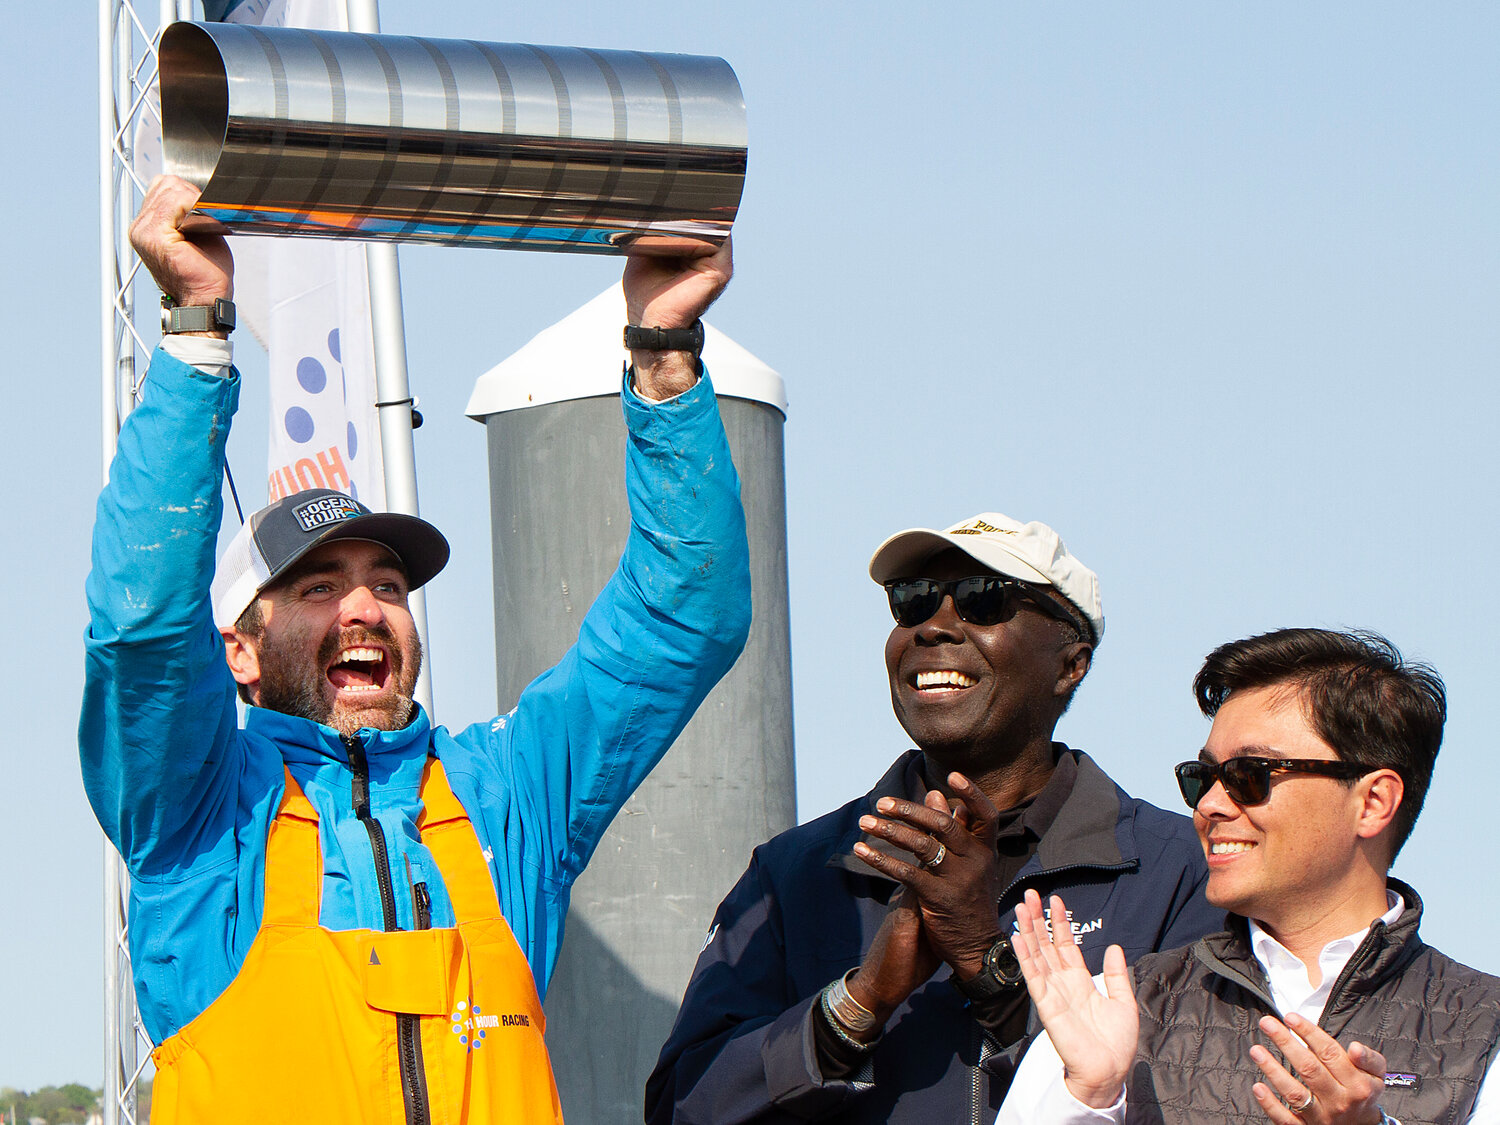 Skipper Charlie Enright of Barrington, hoists the cup after he and the 11th Hour Racing Team won Leg 4, during the Ocean Race 2023 in Newport.